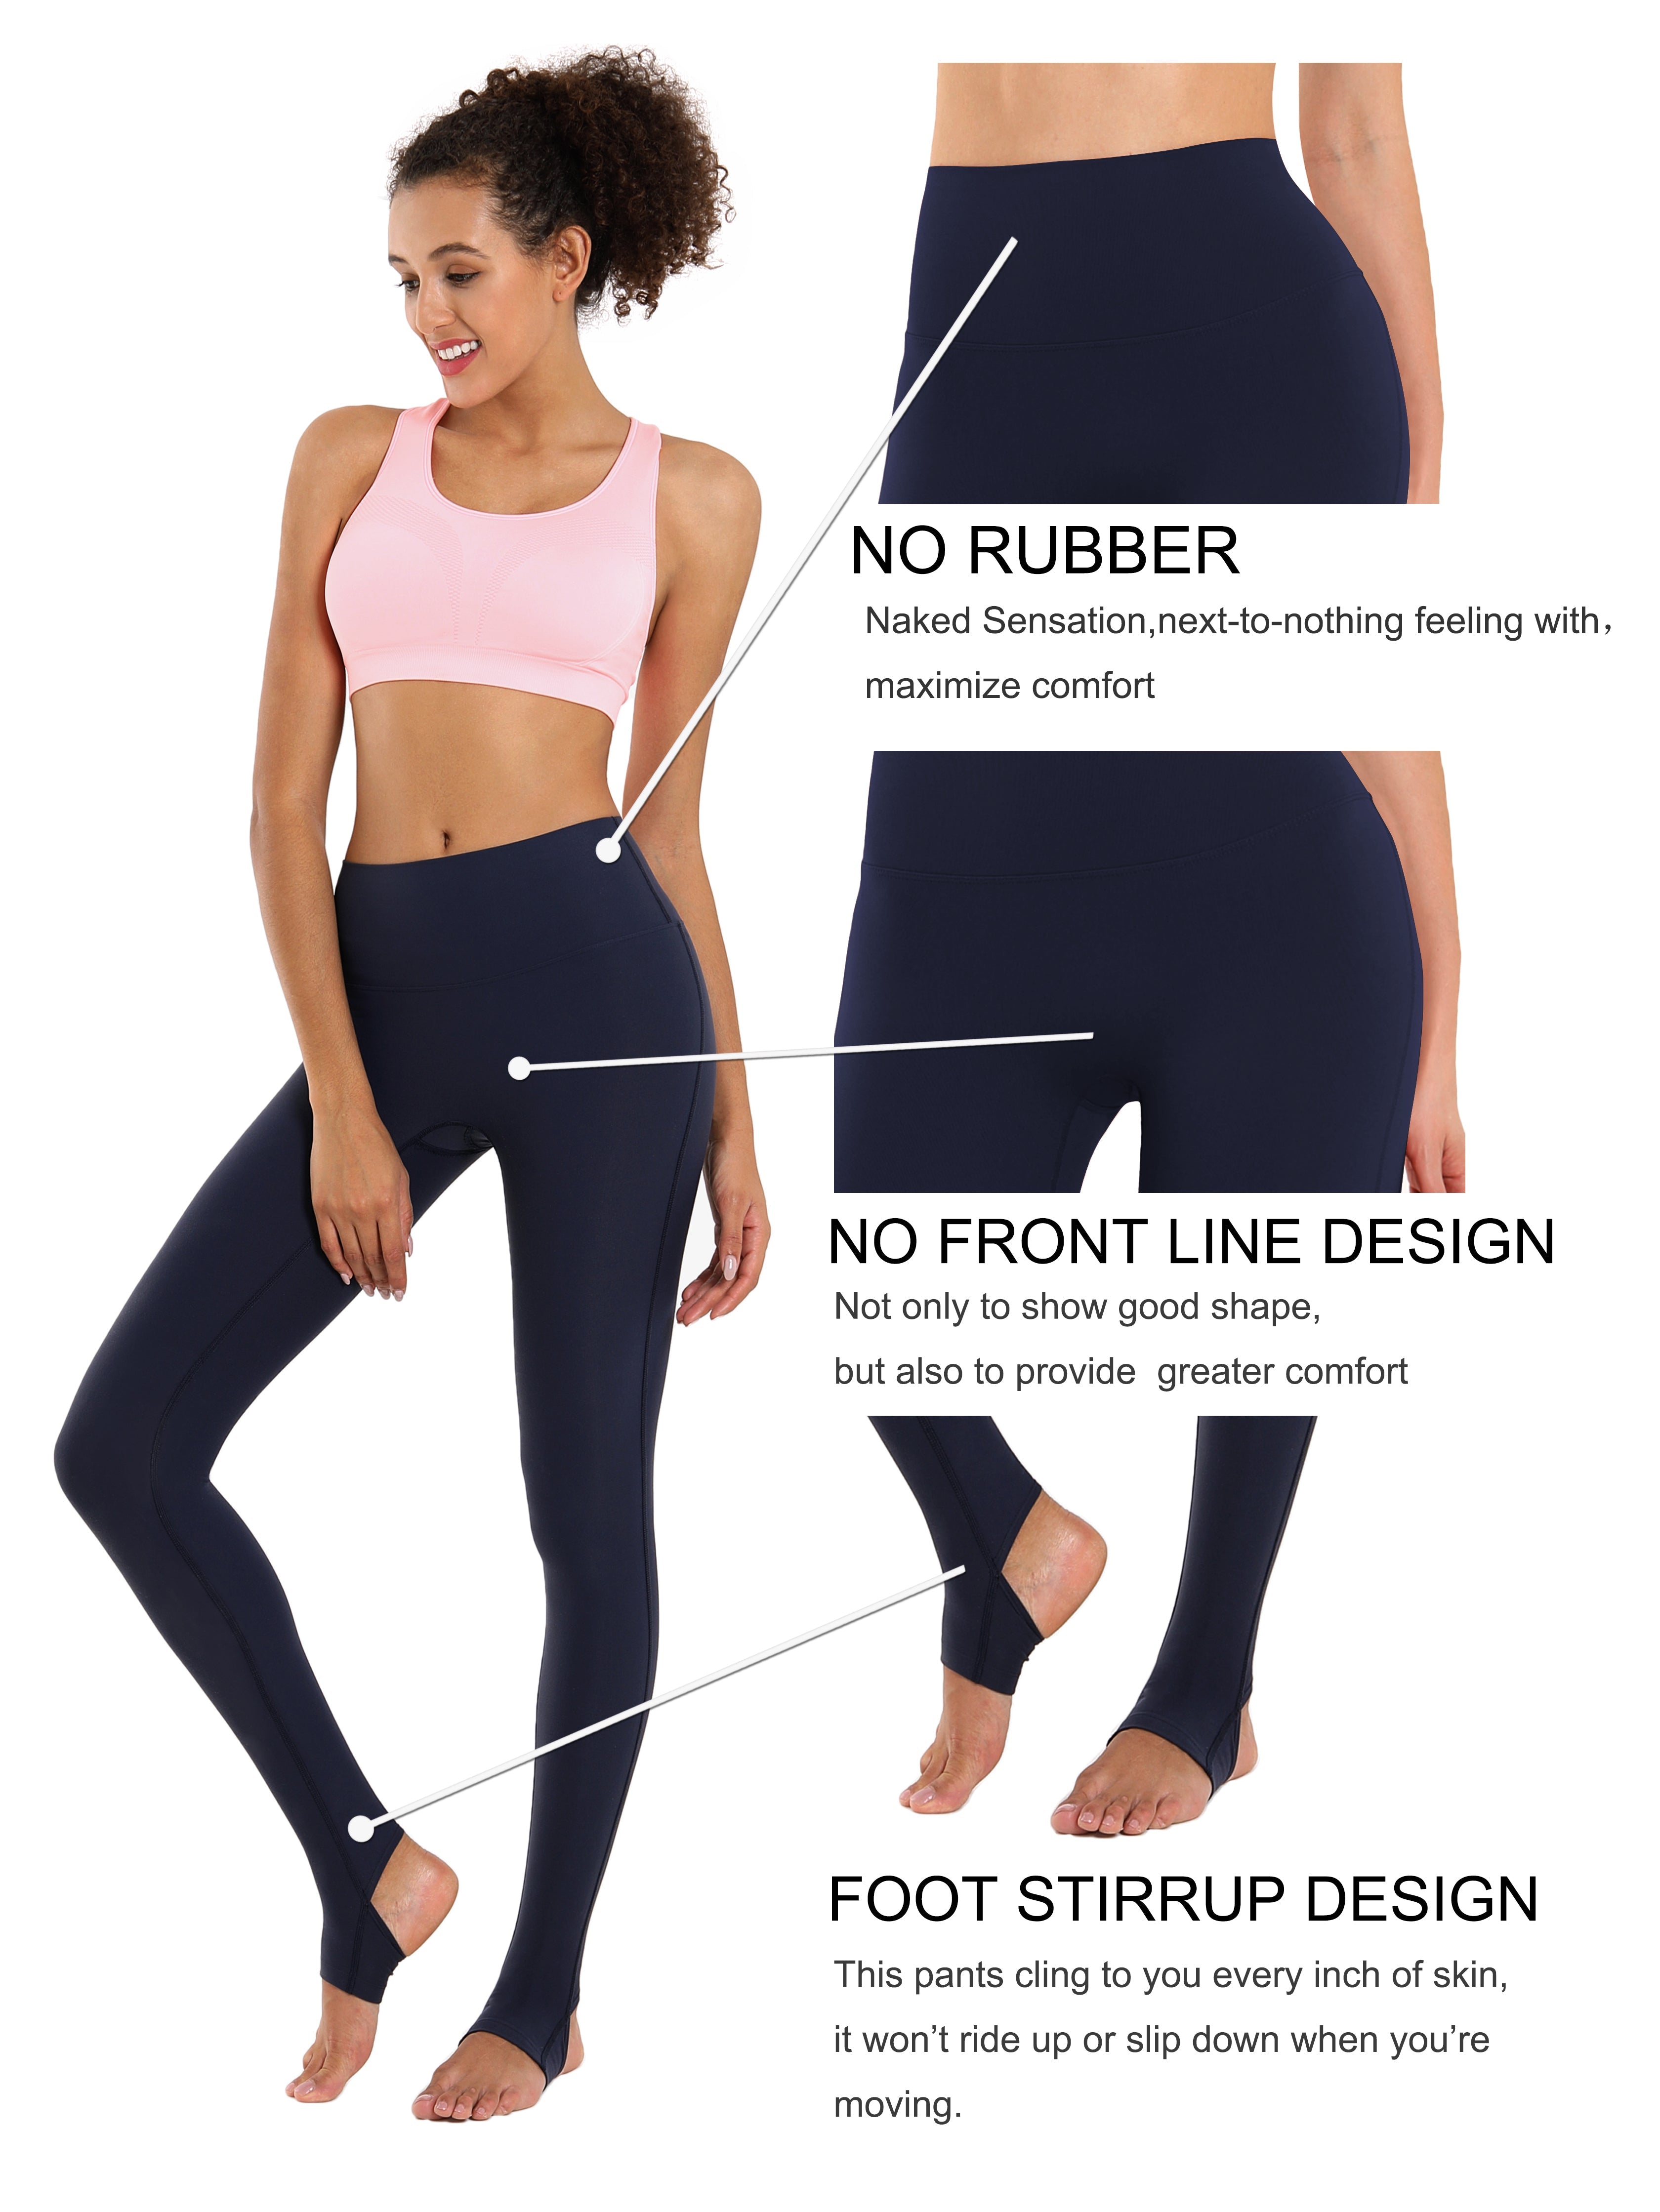 Over the Heel Running Pants darknavy Over the Heel Design 87%Nylon/13%Spandex Fabric doesn't attract lint easily 4-way stretch No see-through Moisture-wicking Tummy control